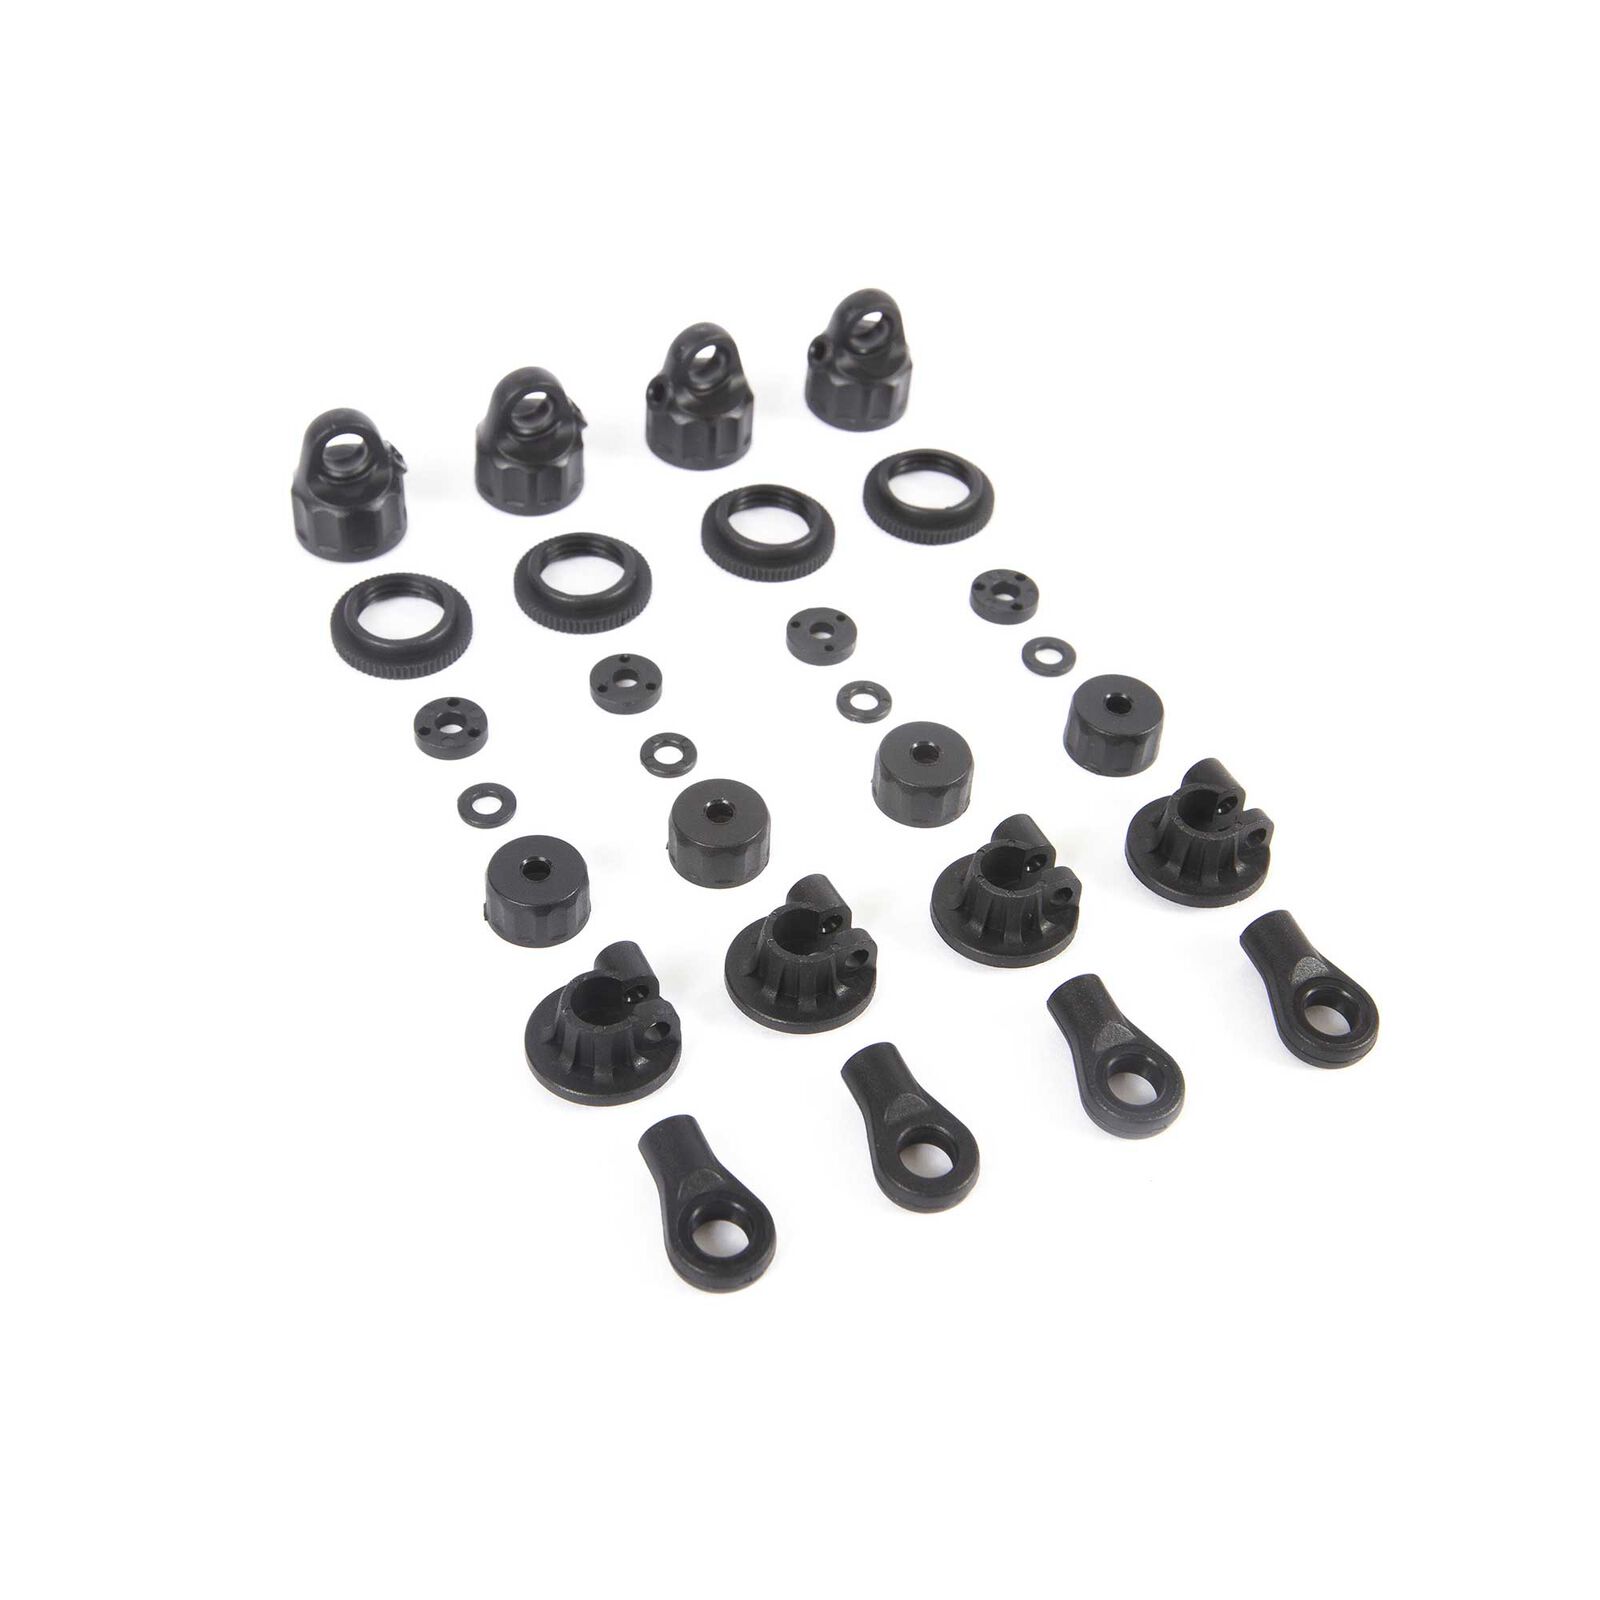 AXIAL Shock Parts, Injection Molded: Capra 1.9 UTB